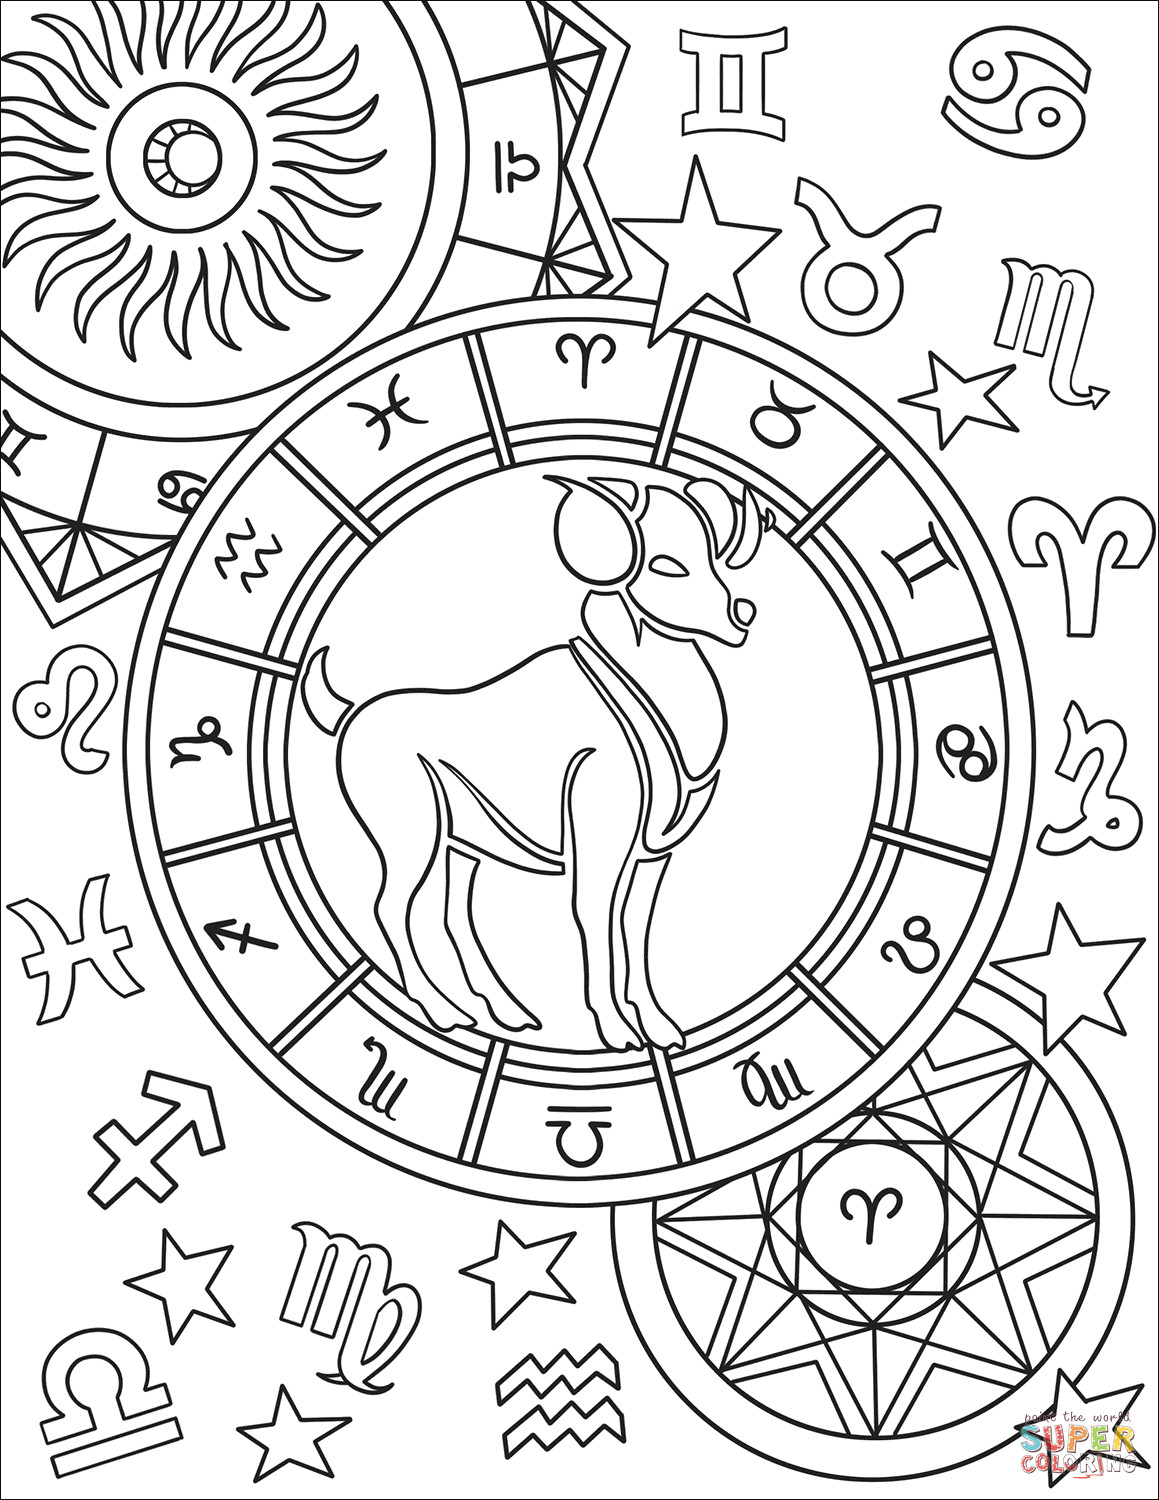 Zodiac Coloring Pages
 Zodiac Free Coloring Pages